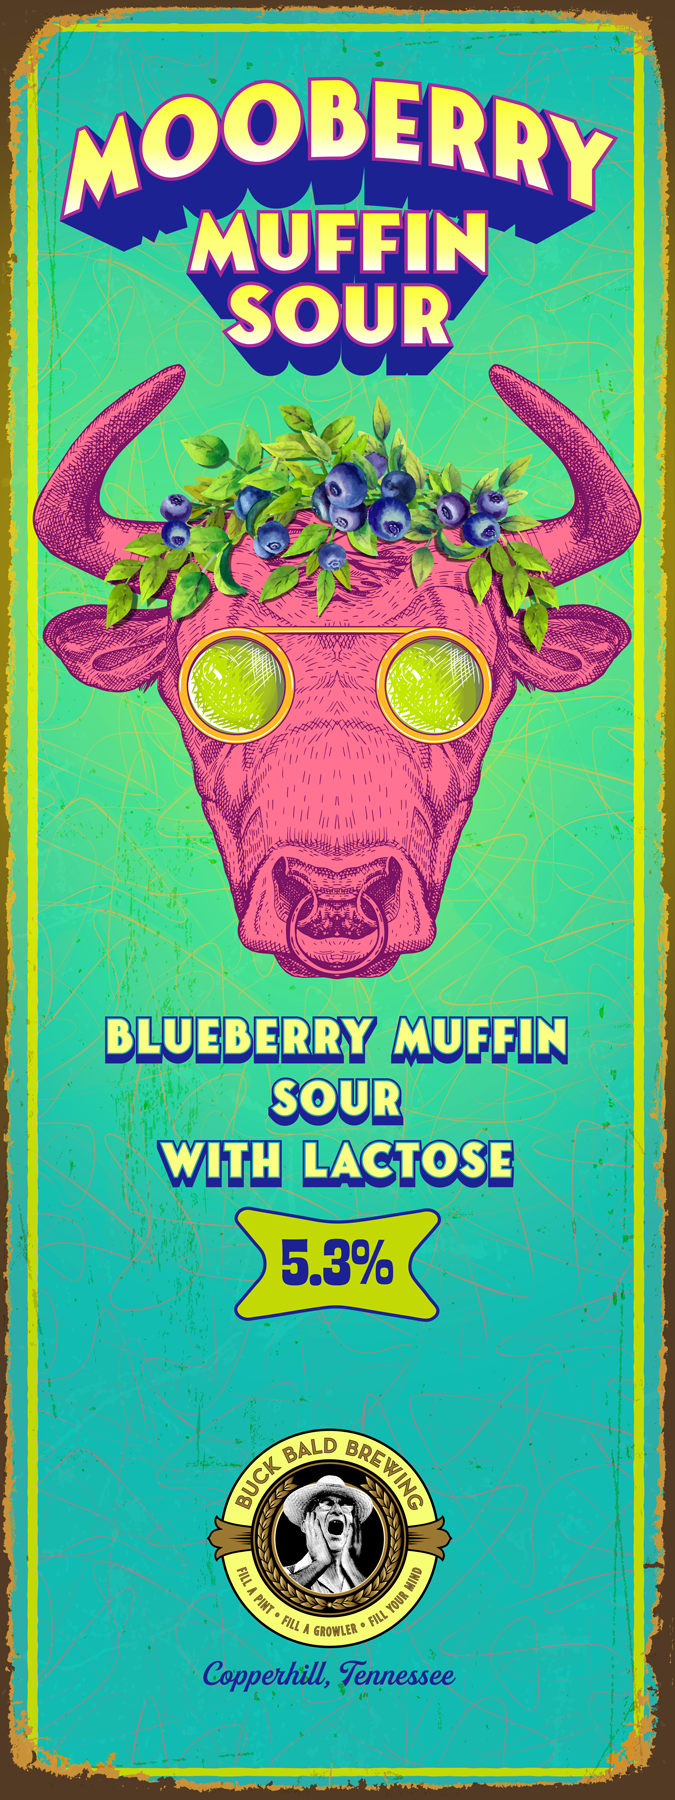 Mooberry Muffin Sour